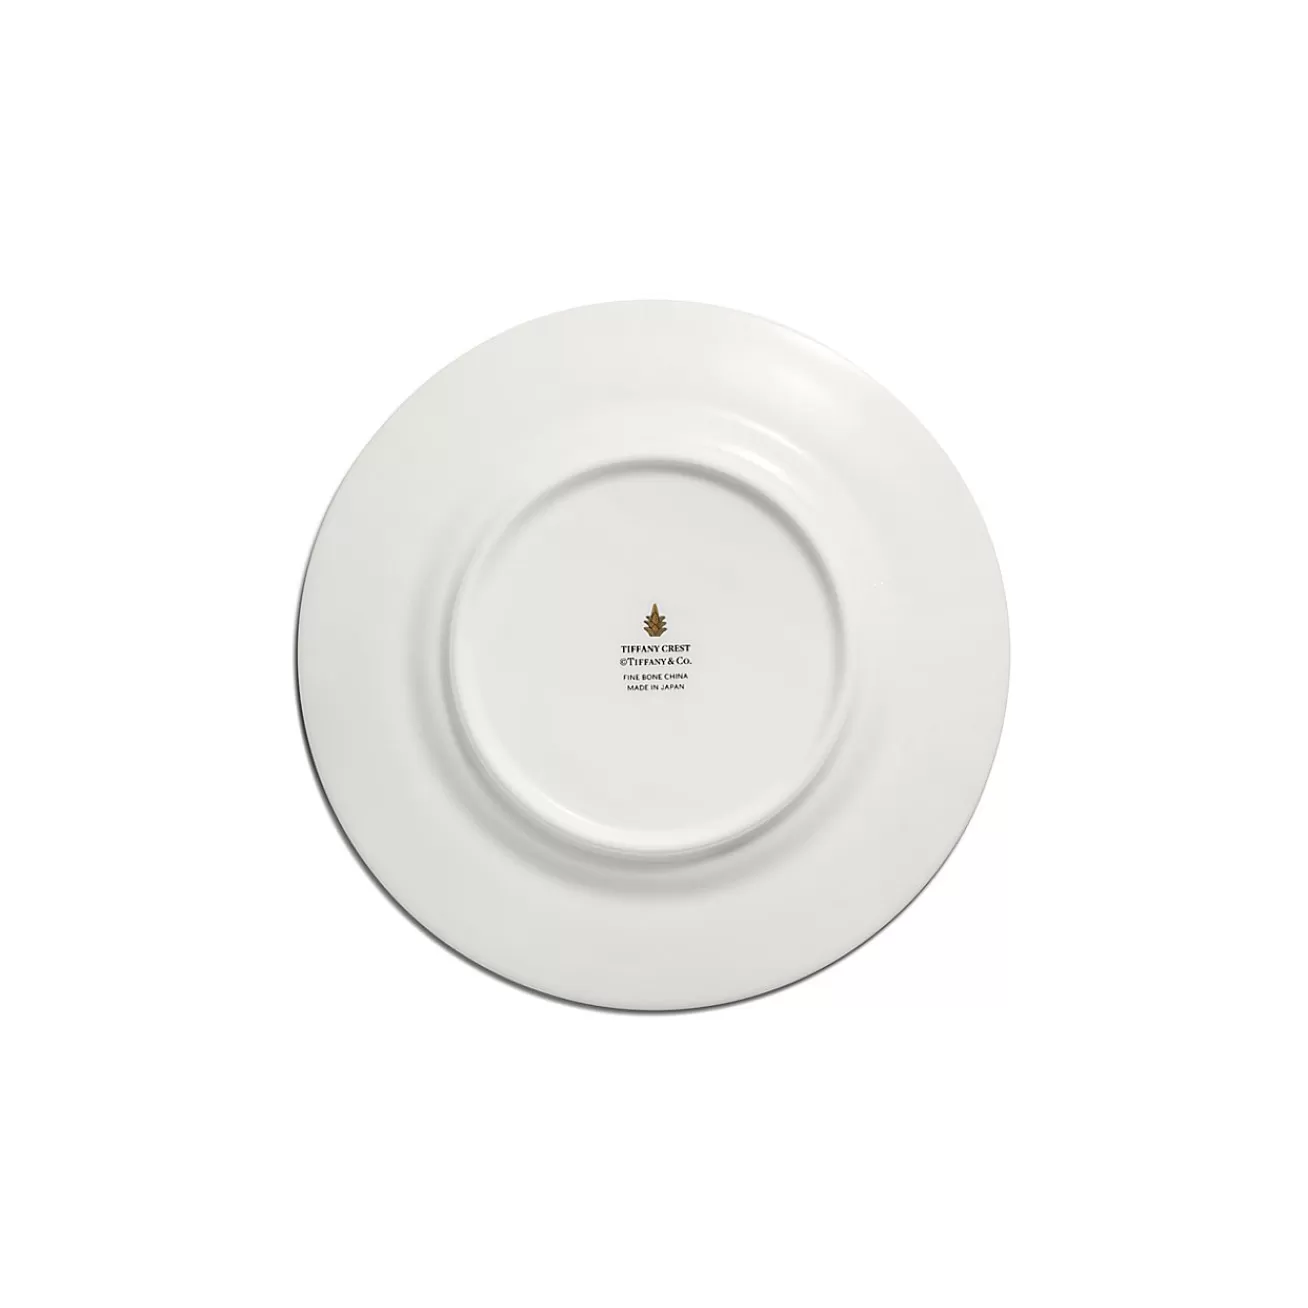 Tiffany & Co. Tiffany Crest Bread and Butter Plate in Bone China | ^ The Home | Housewarming Gifts